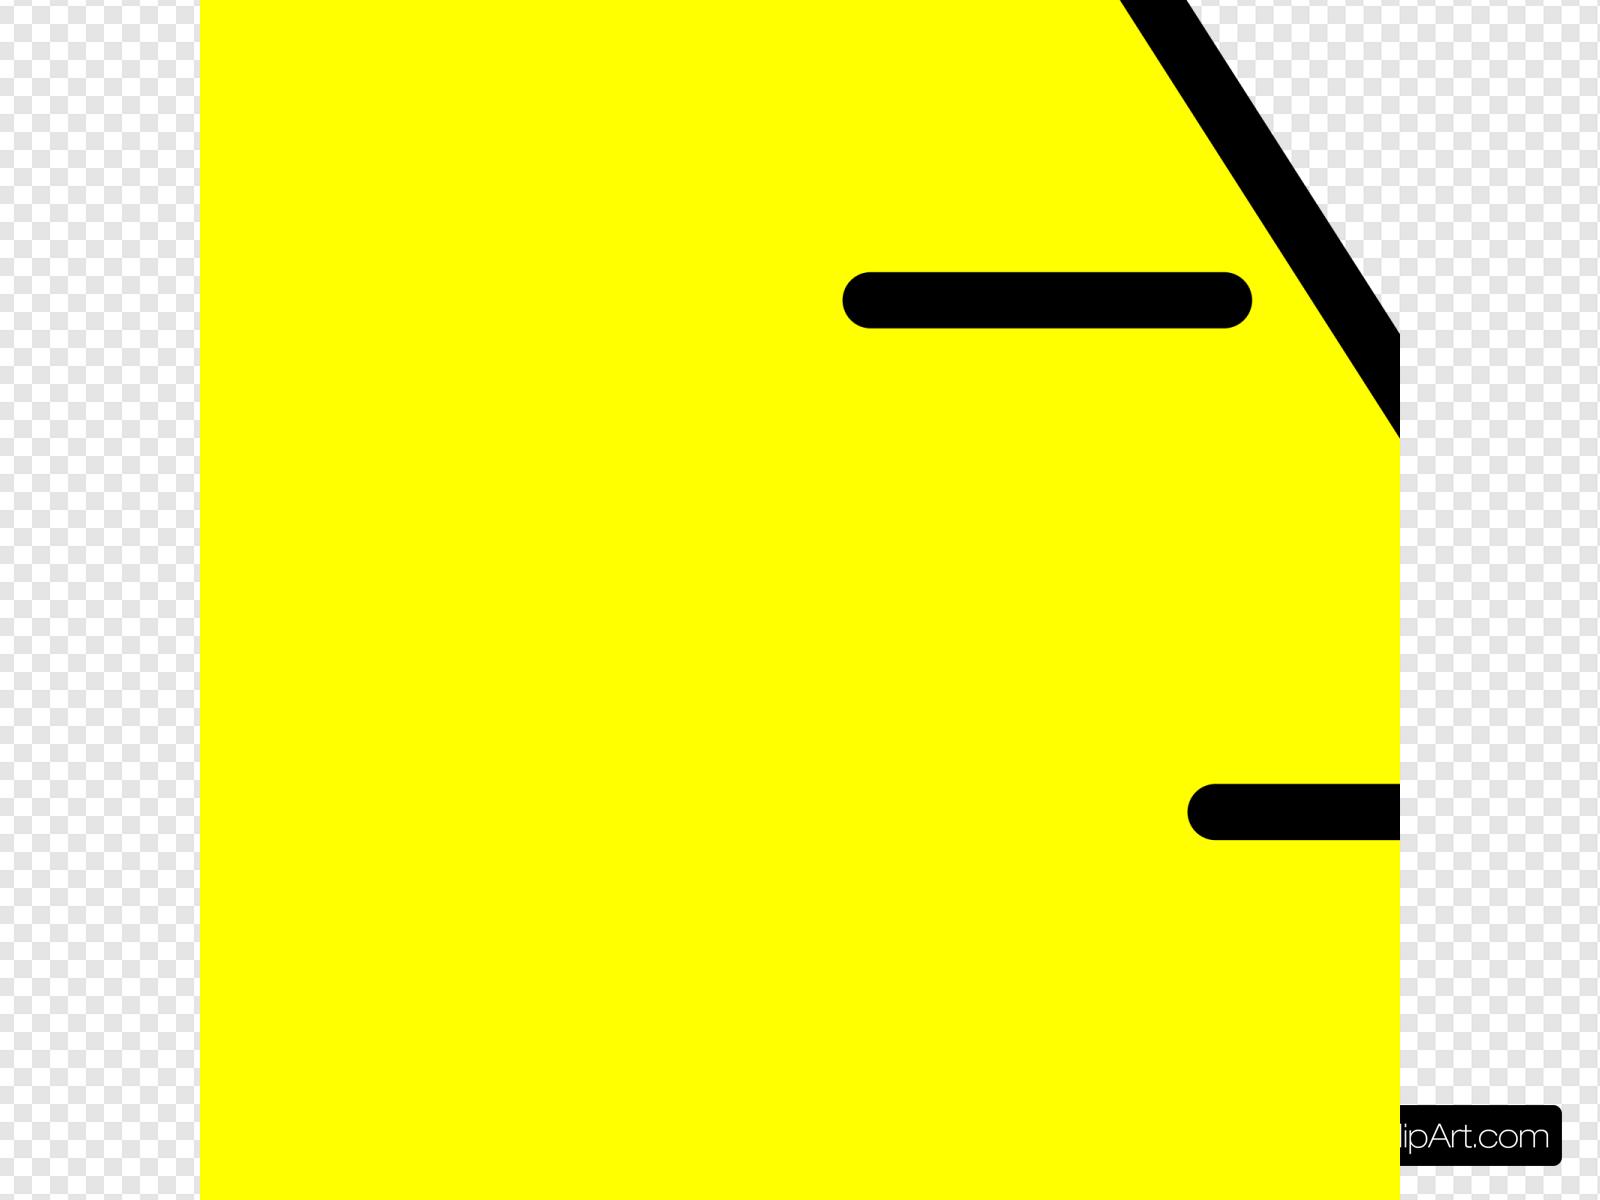 Yellow Flask Clip art, Icon and SVG.